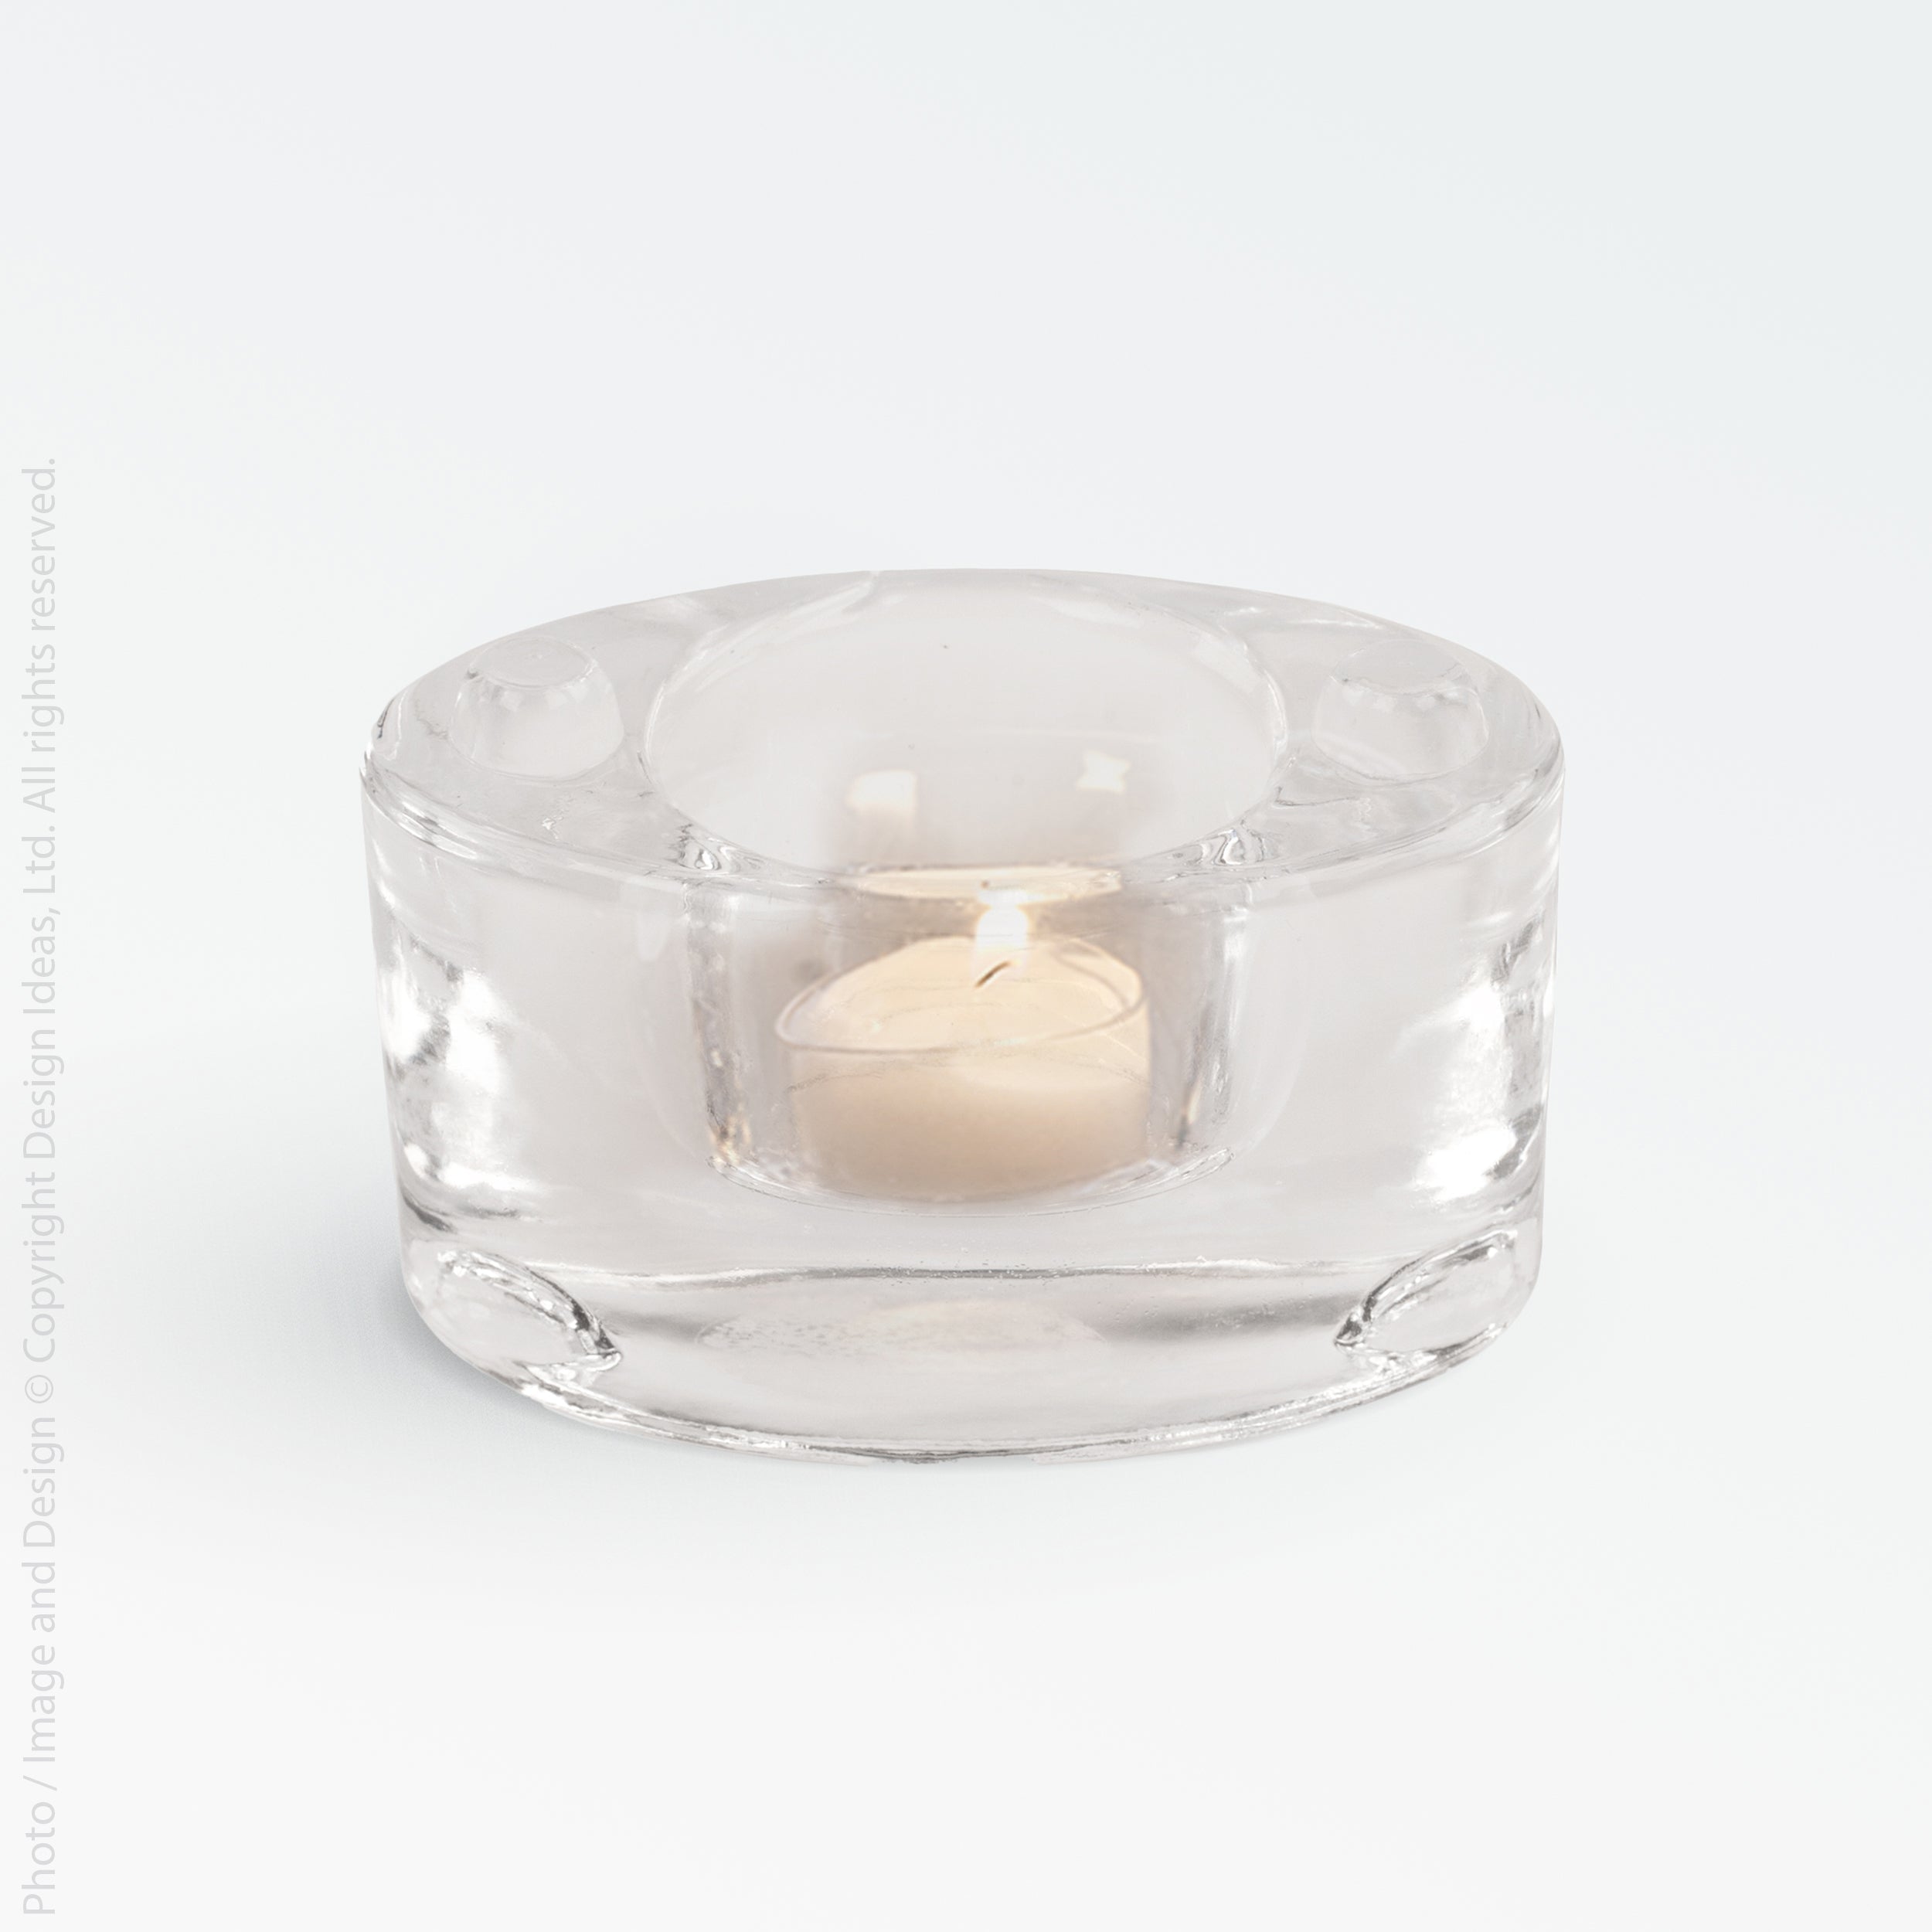 Catseye Stackable Glass  Candle Holder white color | Image 3 |  | Masterfully made with natural glass for long lasting use | Available in white color | texxture home